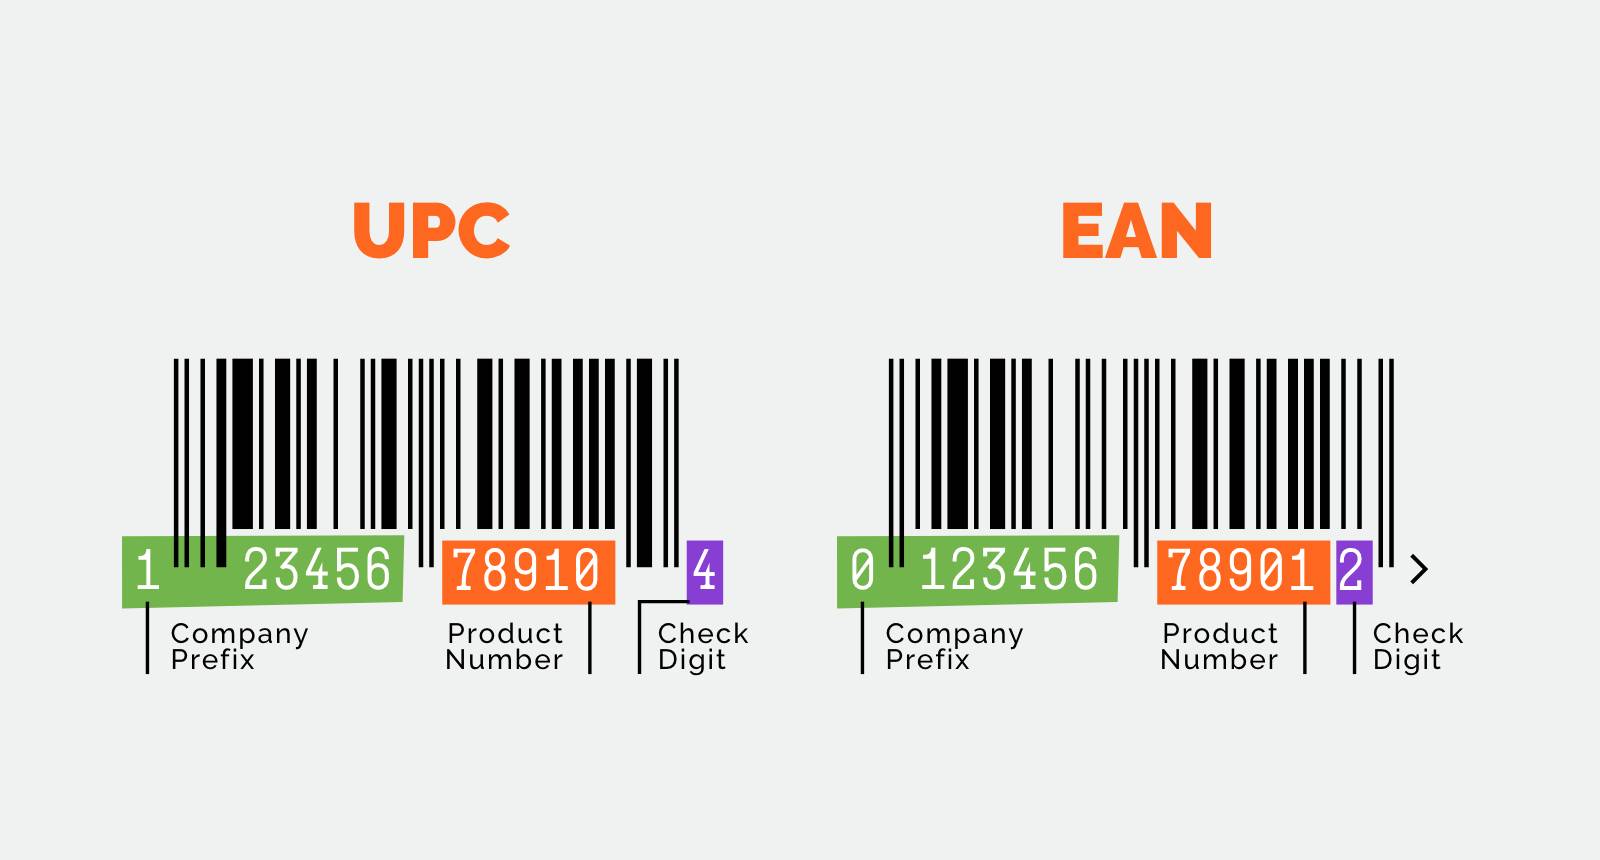 Image of a upc and ean barcode and their differences